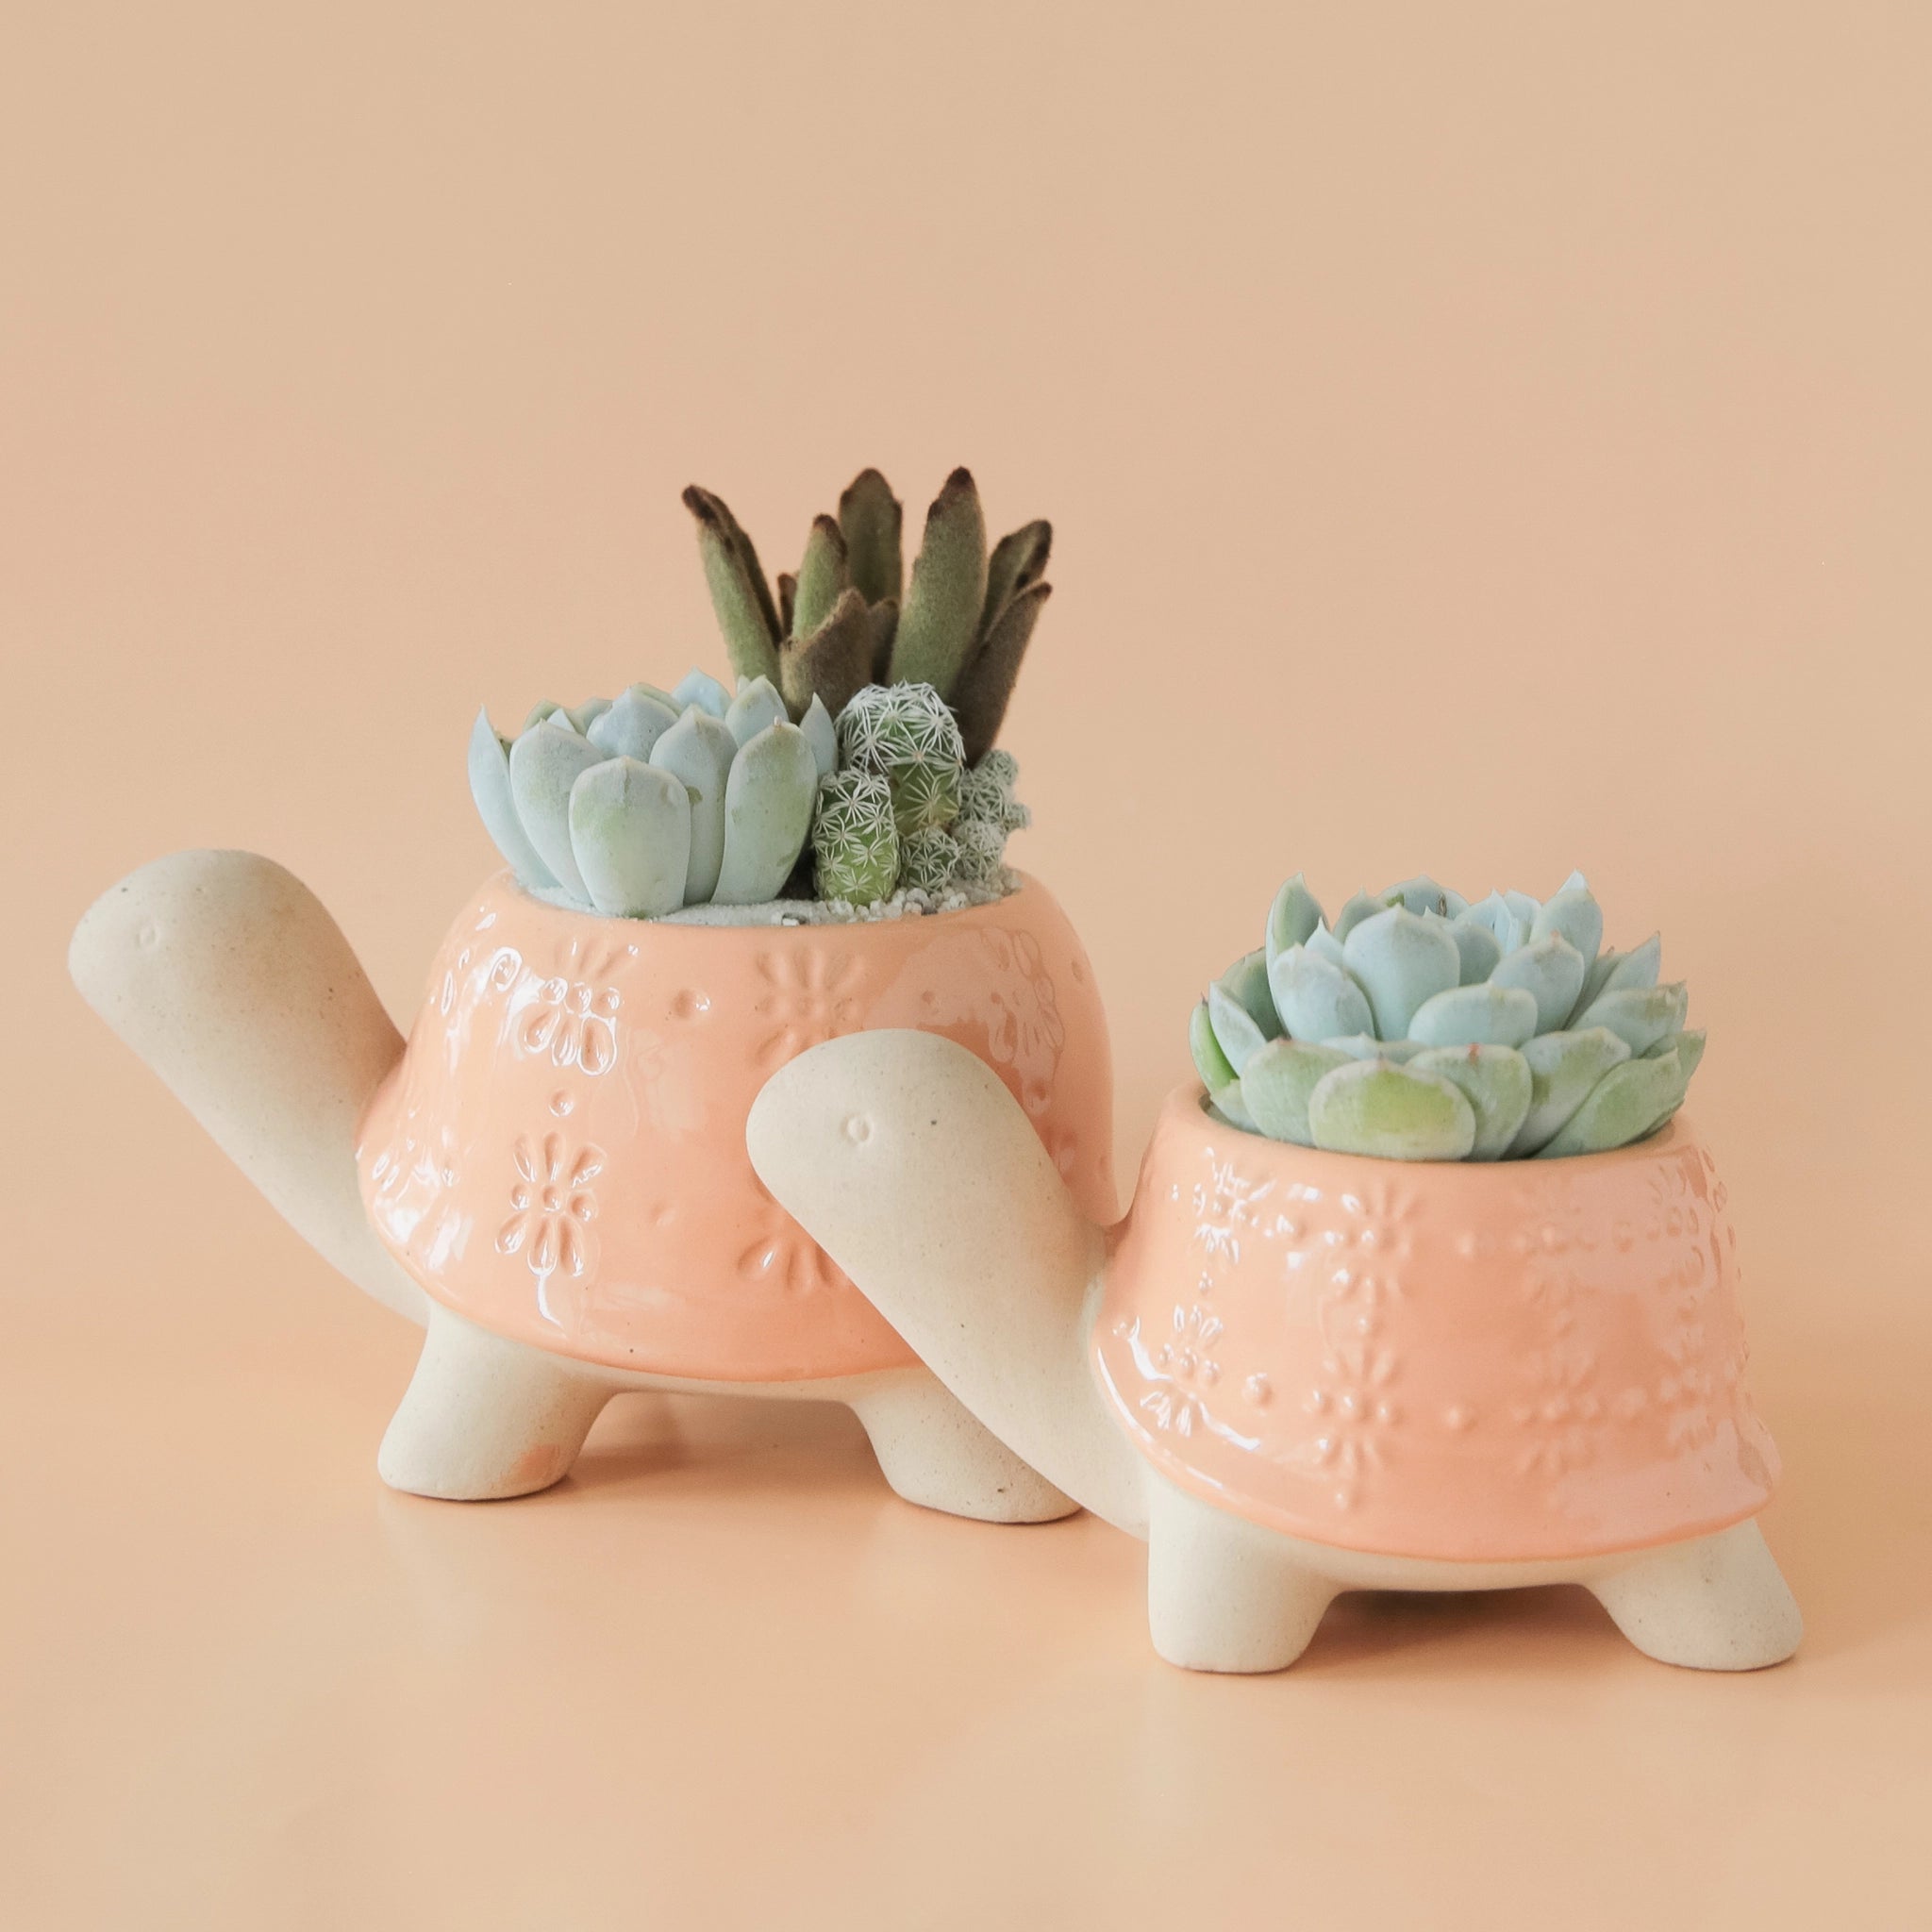 On a peachy background is two different sized ceramic planters in the shape of a turtle with a light orange &quot;shell&quot; that has a subtle floral texture. The planters are filled with succulents and cacti that are sold separately.